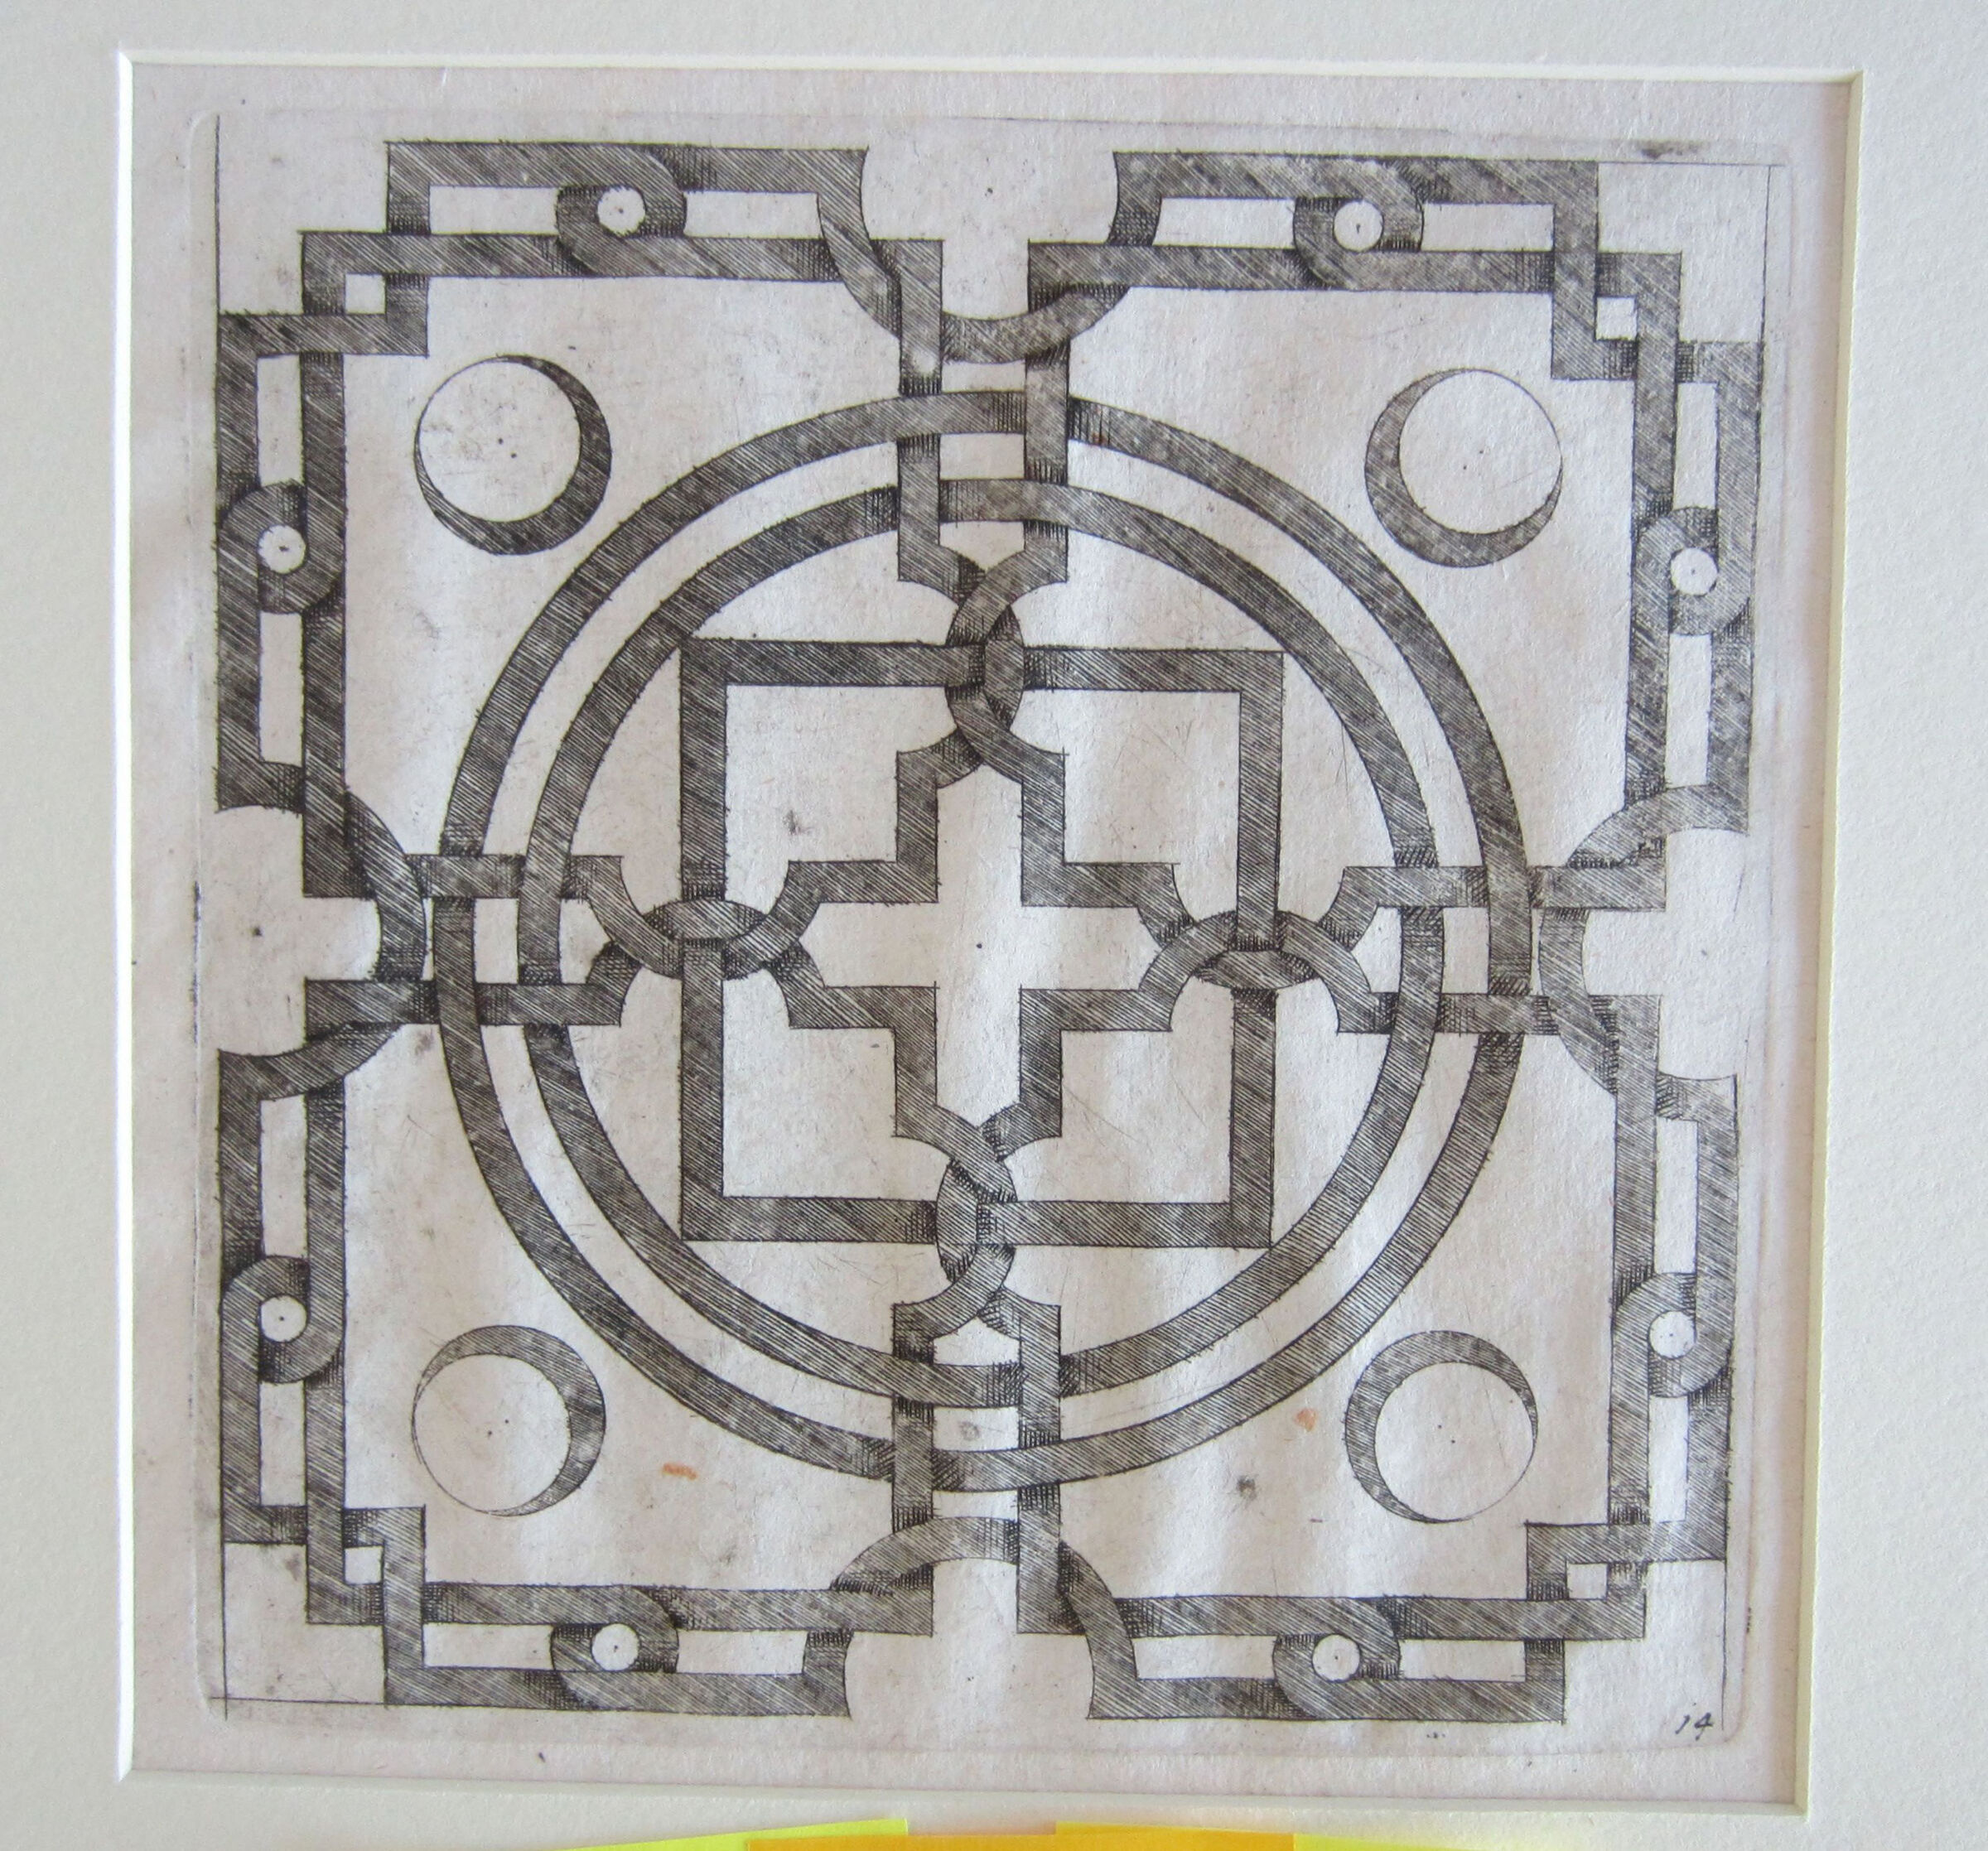 Interlace Centered By A Cross, Crescents In The Four Corners Of The Design